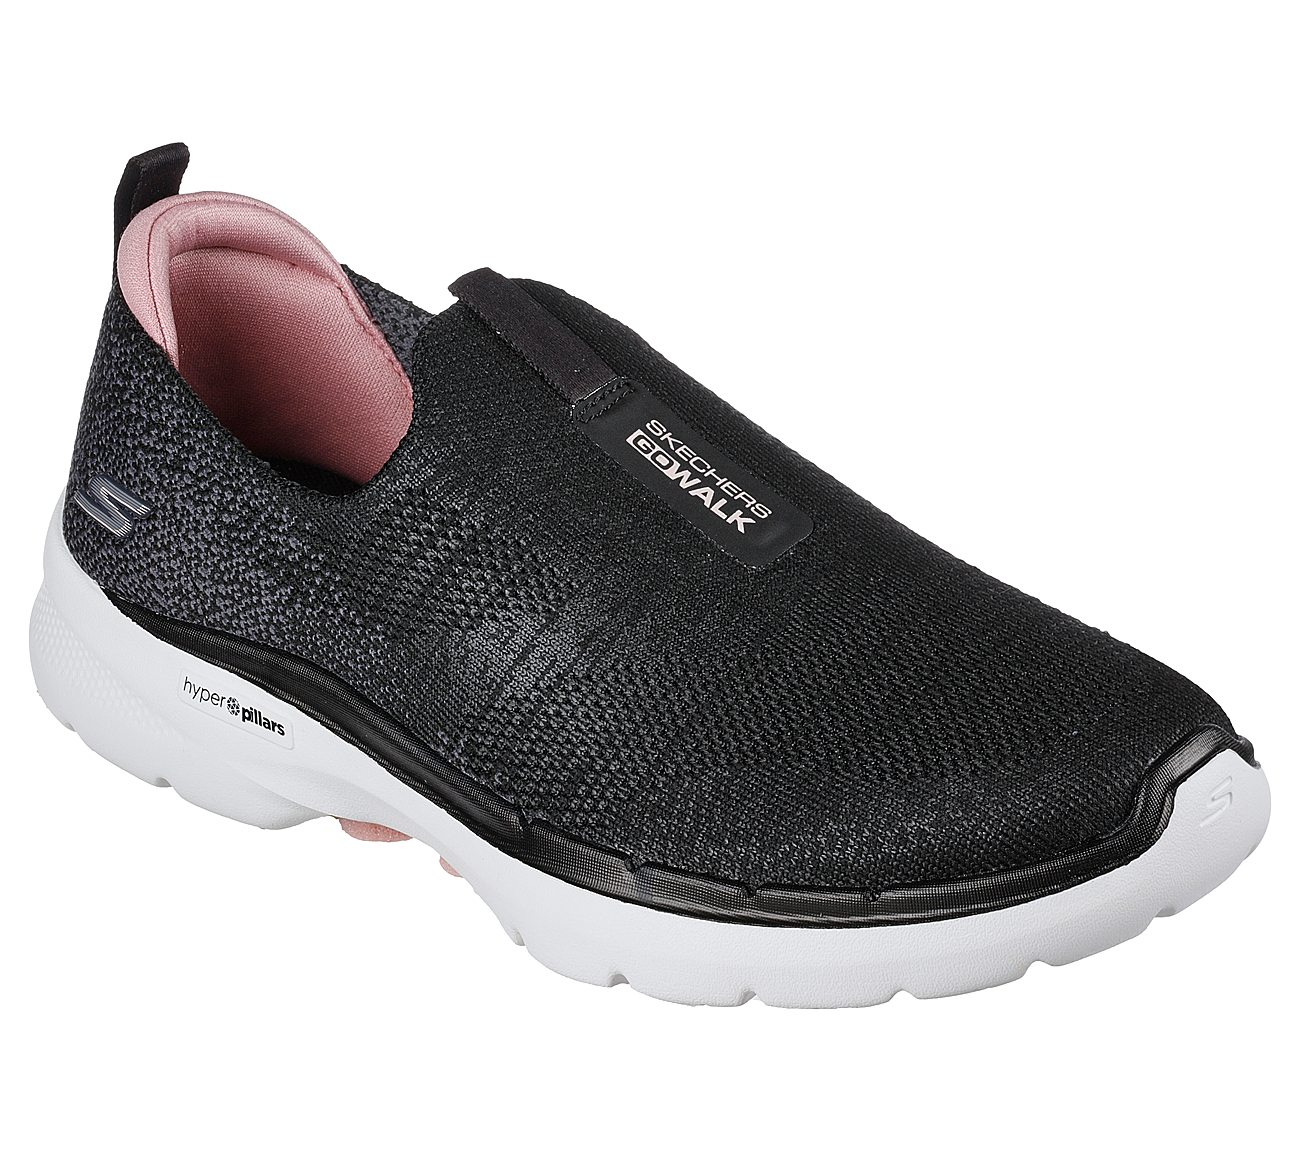 GO WALK 6 - GLIMMERING, BLACK/PINK Footwear Lateral View